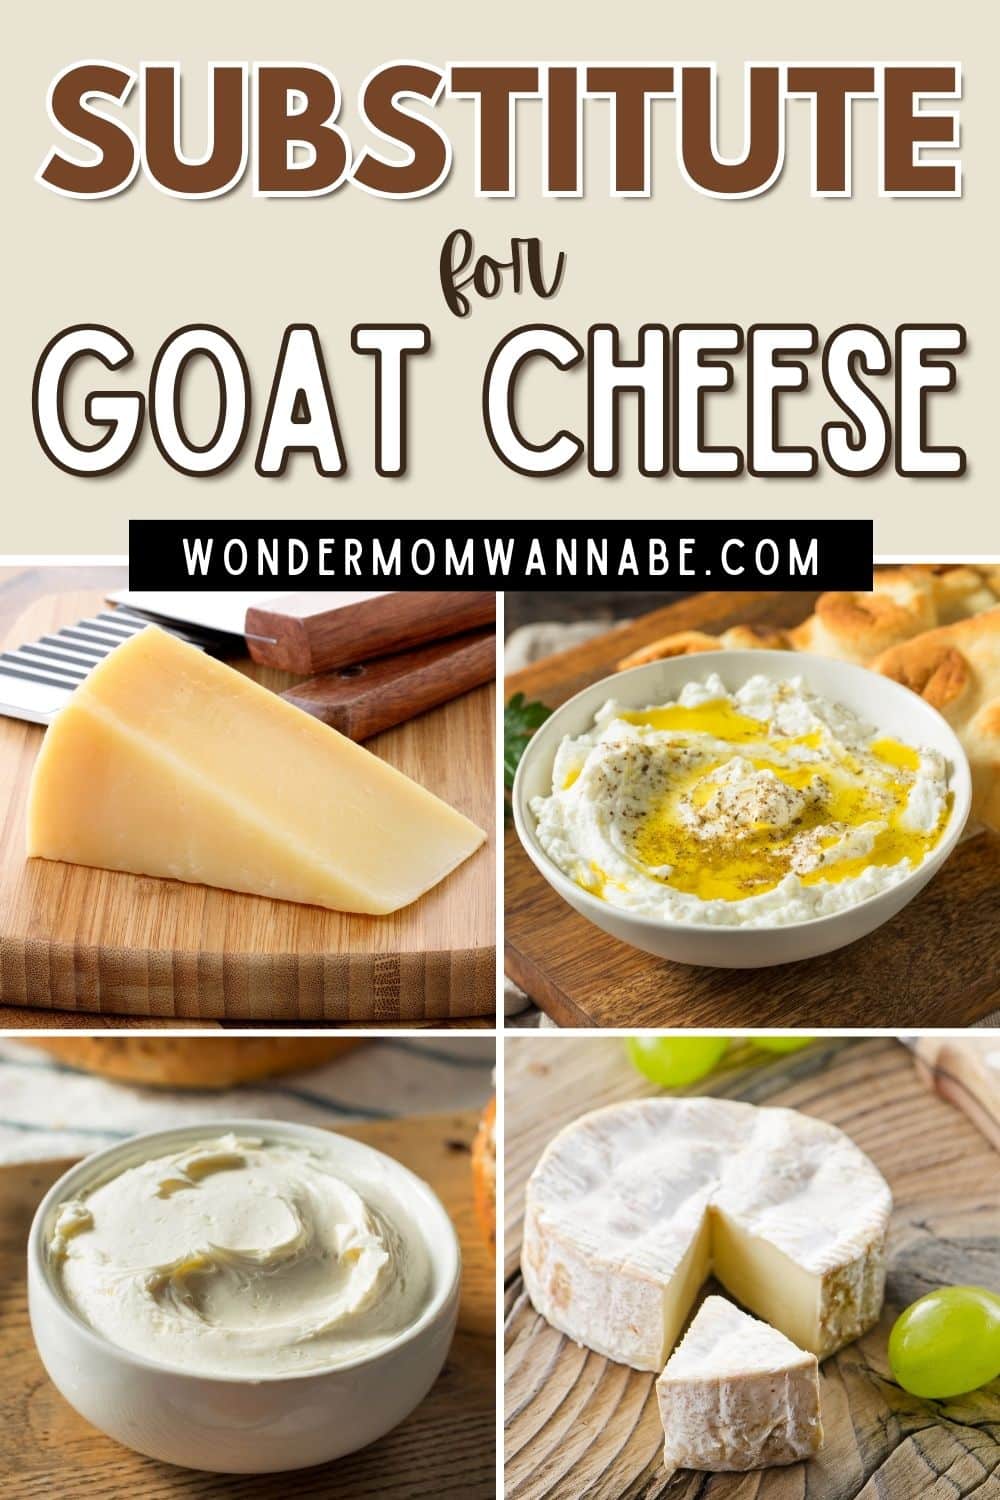 Looking for a substitute for goat cheese? Explore various alternatives to goat cheese that can be used in your recipes. Find the perfect goat cheese substitute that matches its creamy and tangy flavor profile.